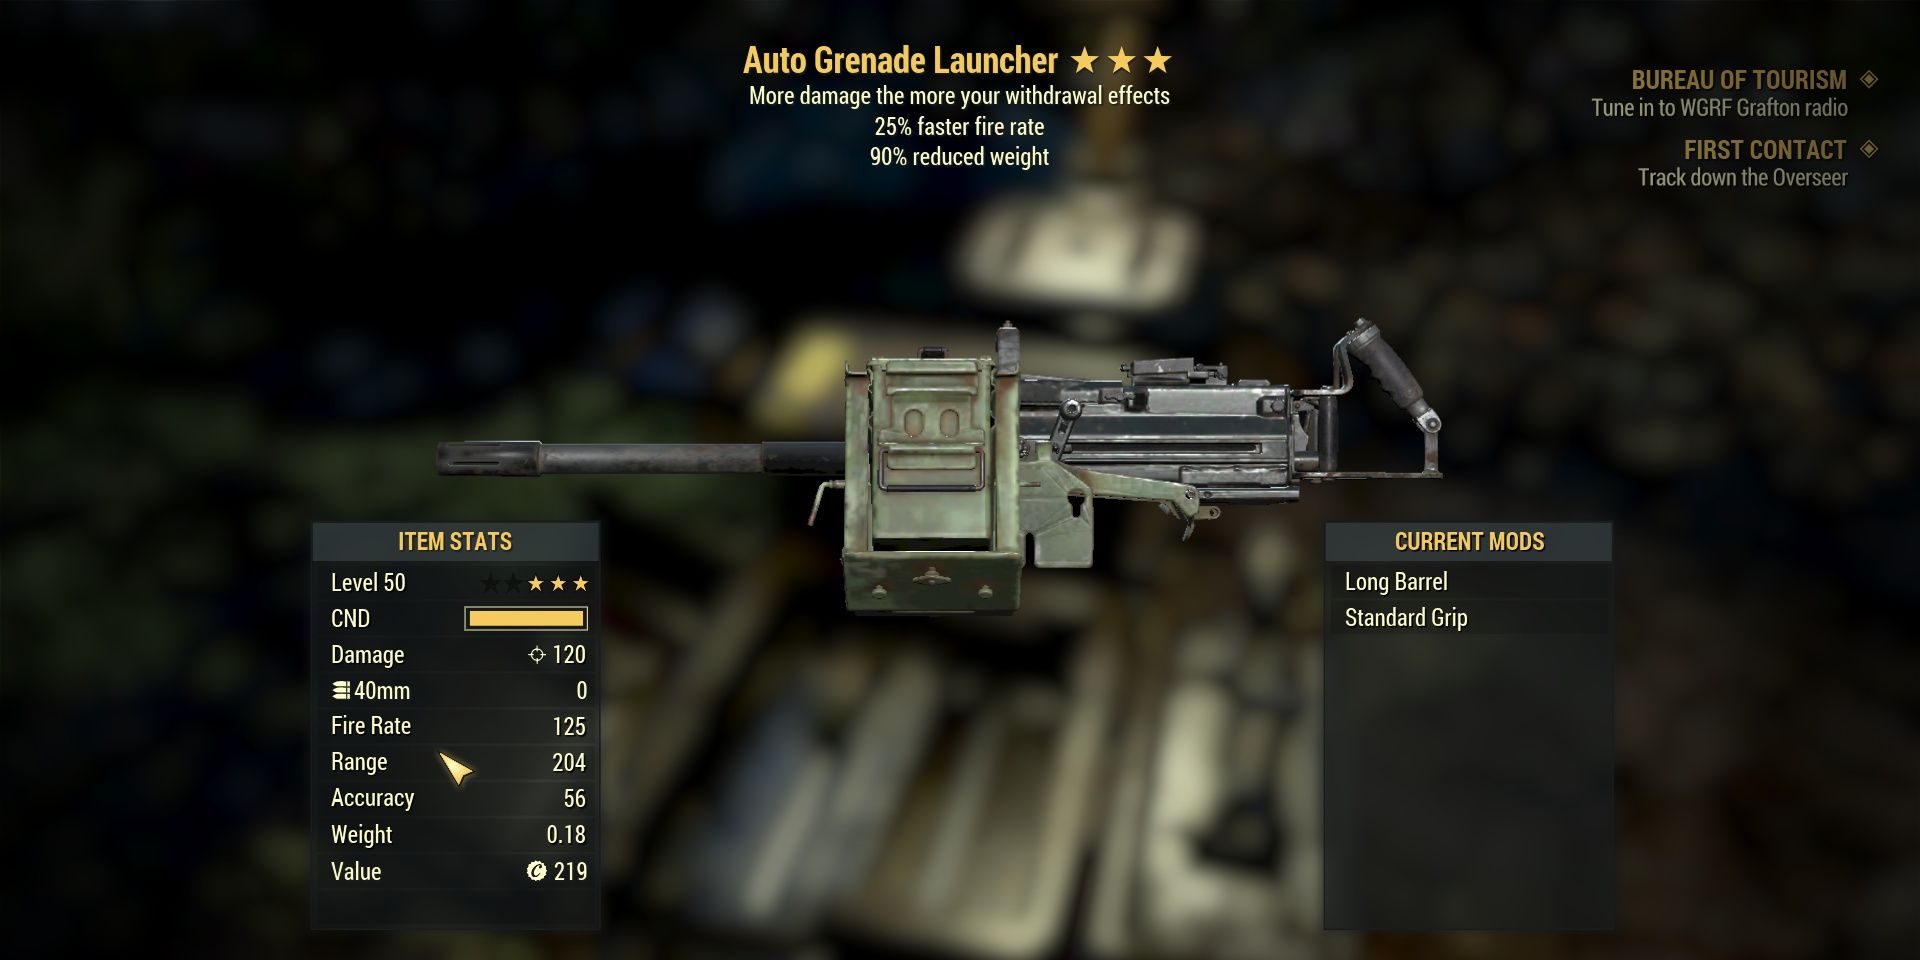 Auto Grenade Launcher's weapon stats and mods page.